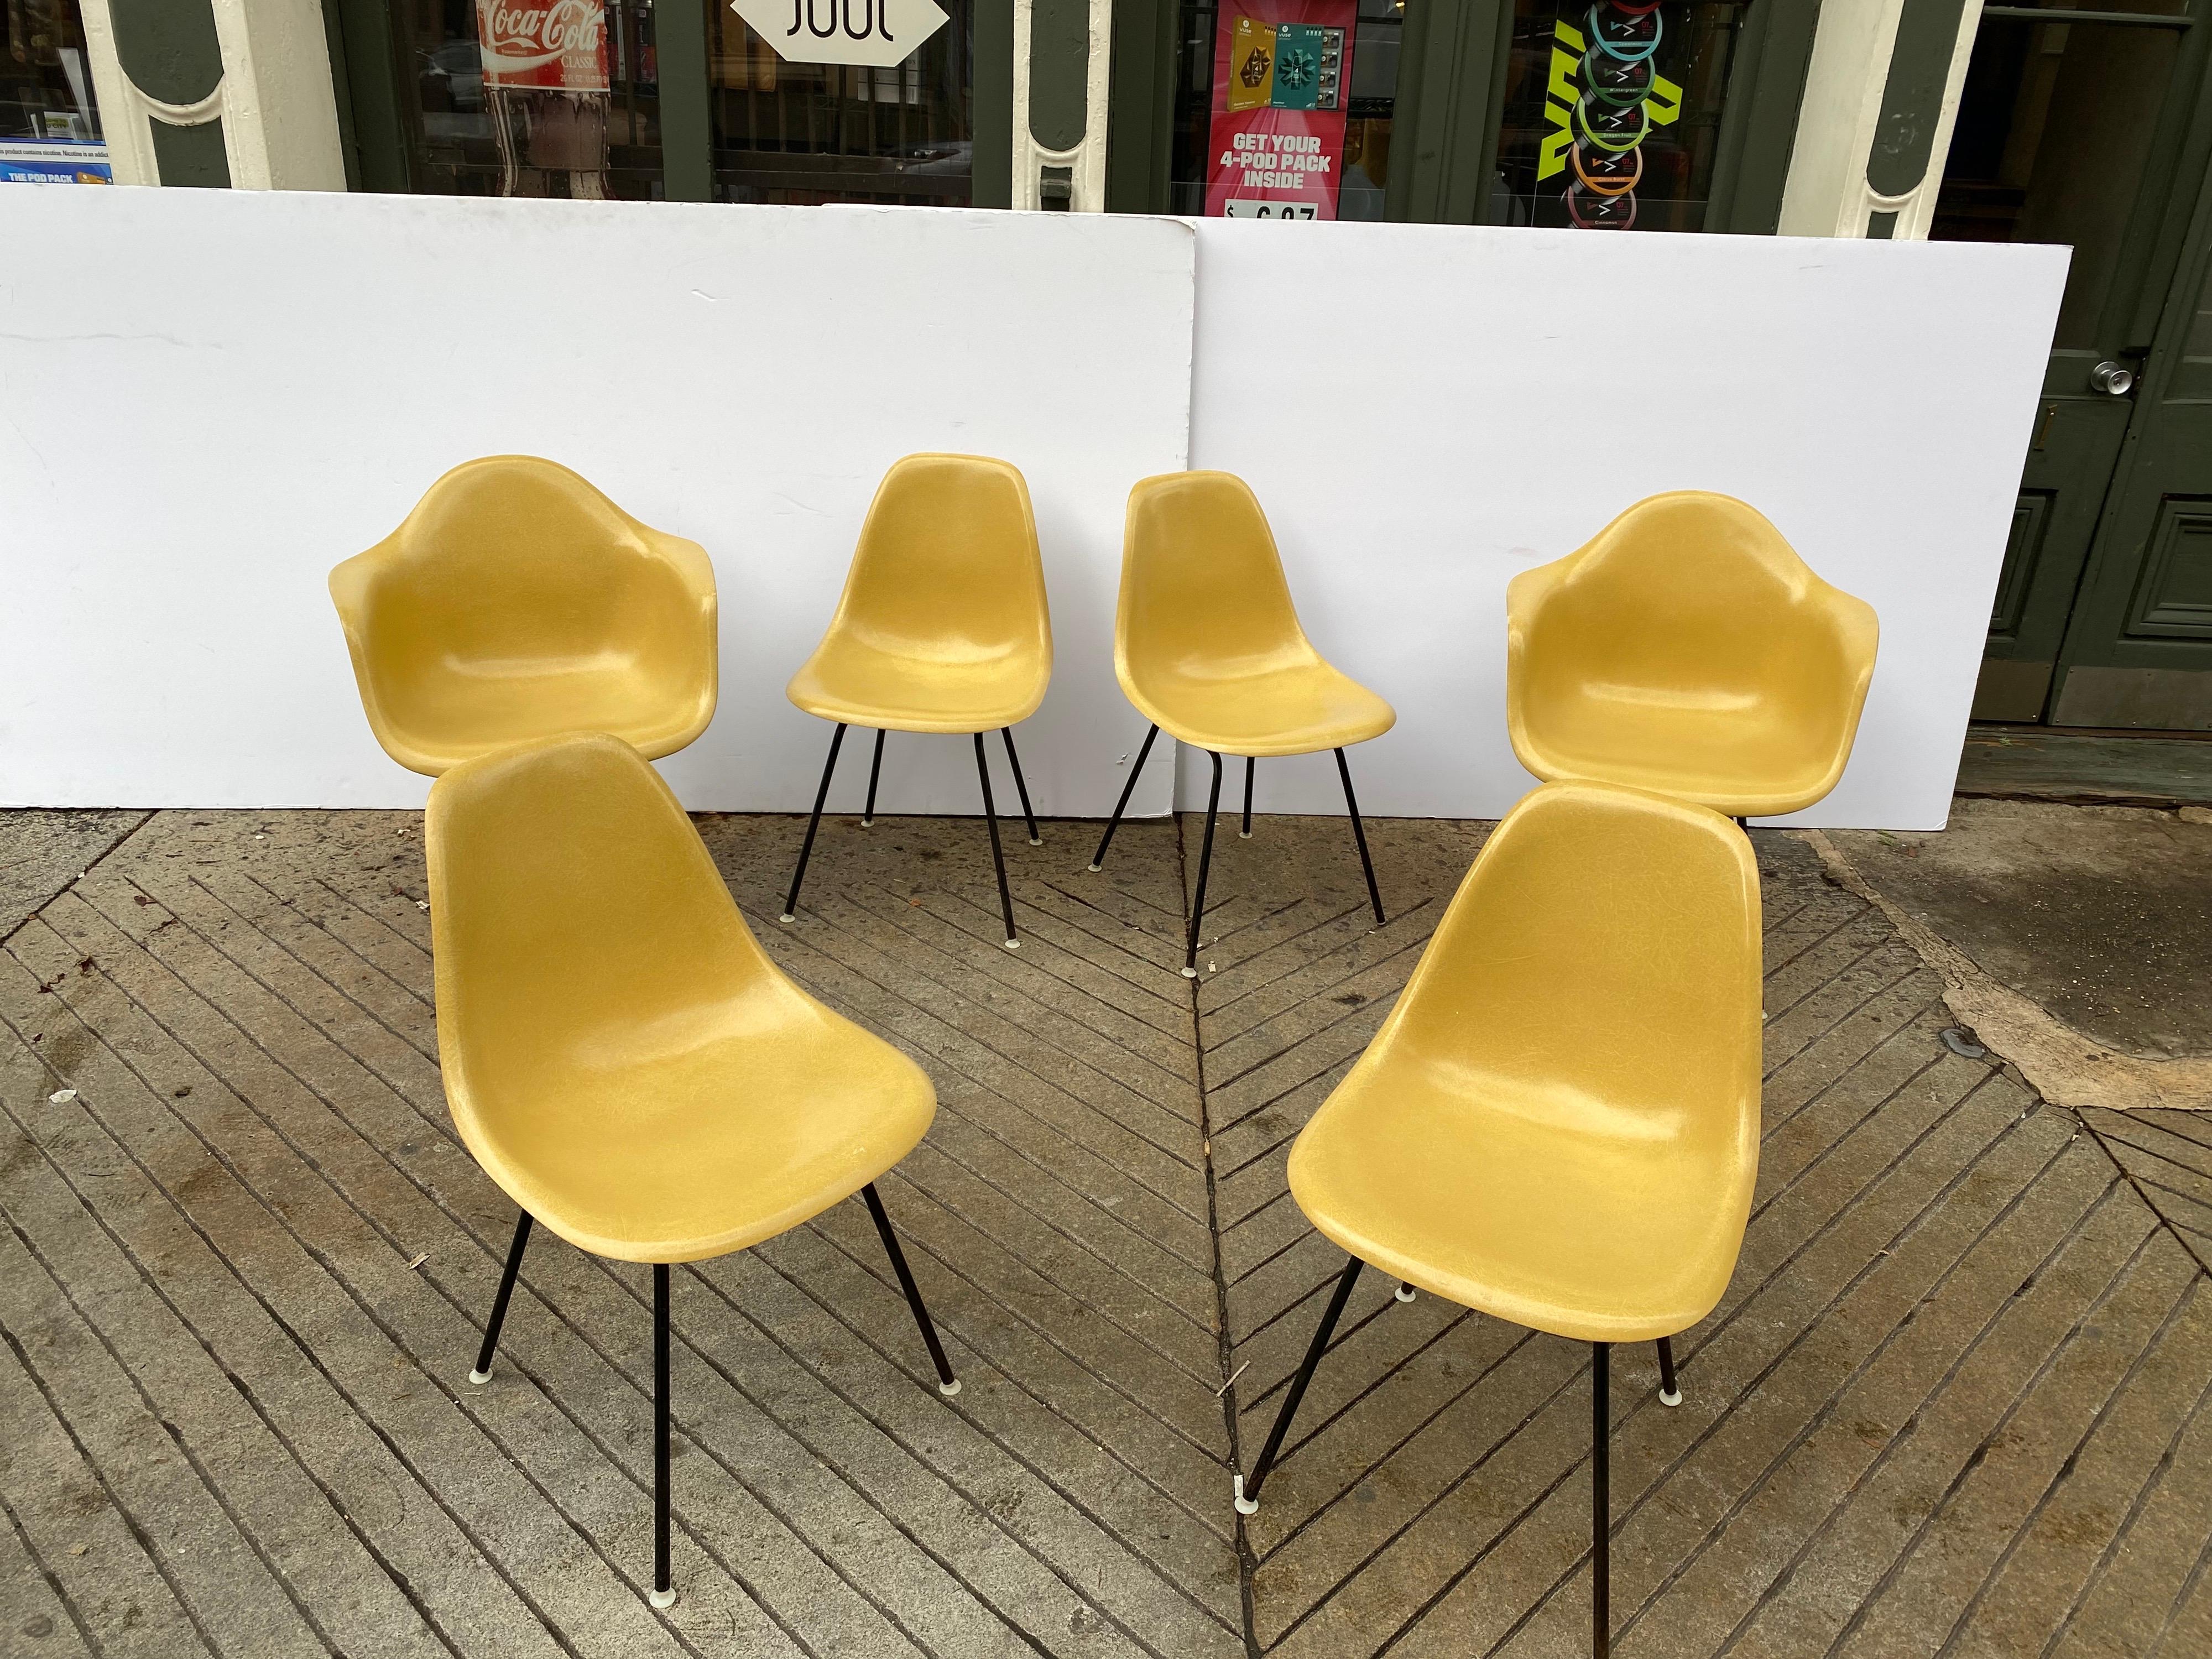 Charles and Ray Eames set of 6 fiberglass chairs, 2 armed and 4 armless models. Chairs are incredibly clean! These had the early vinyl Slip Covers on them so the fiberglass is in great shape! Armchairs measure 24.75